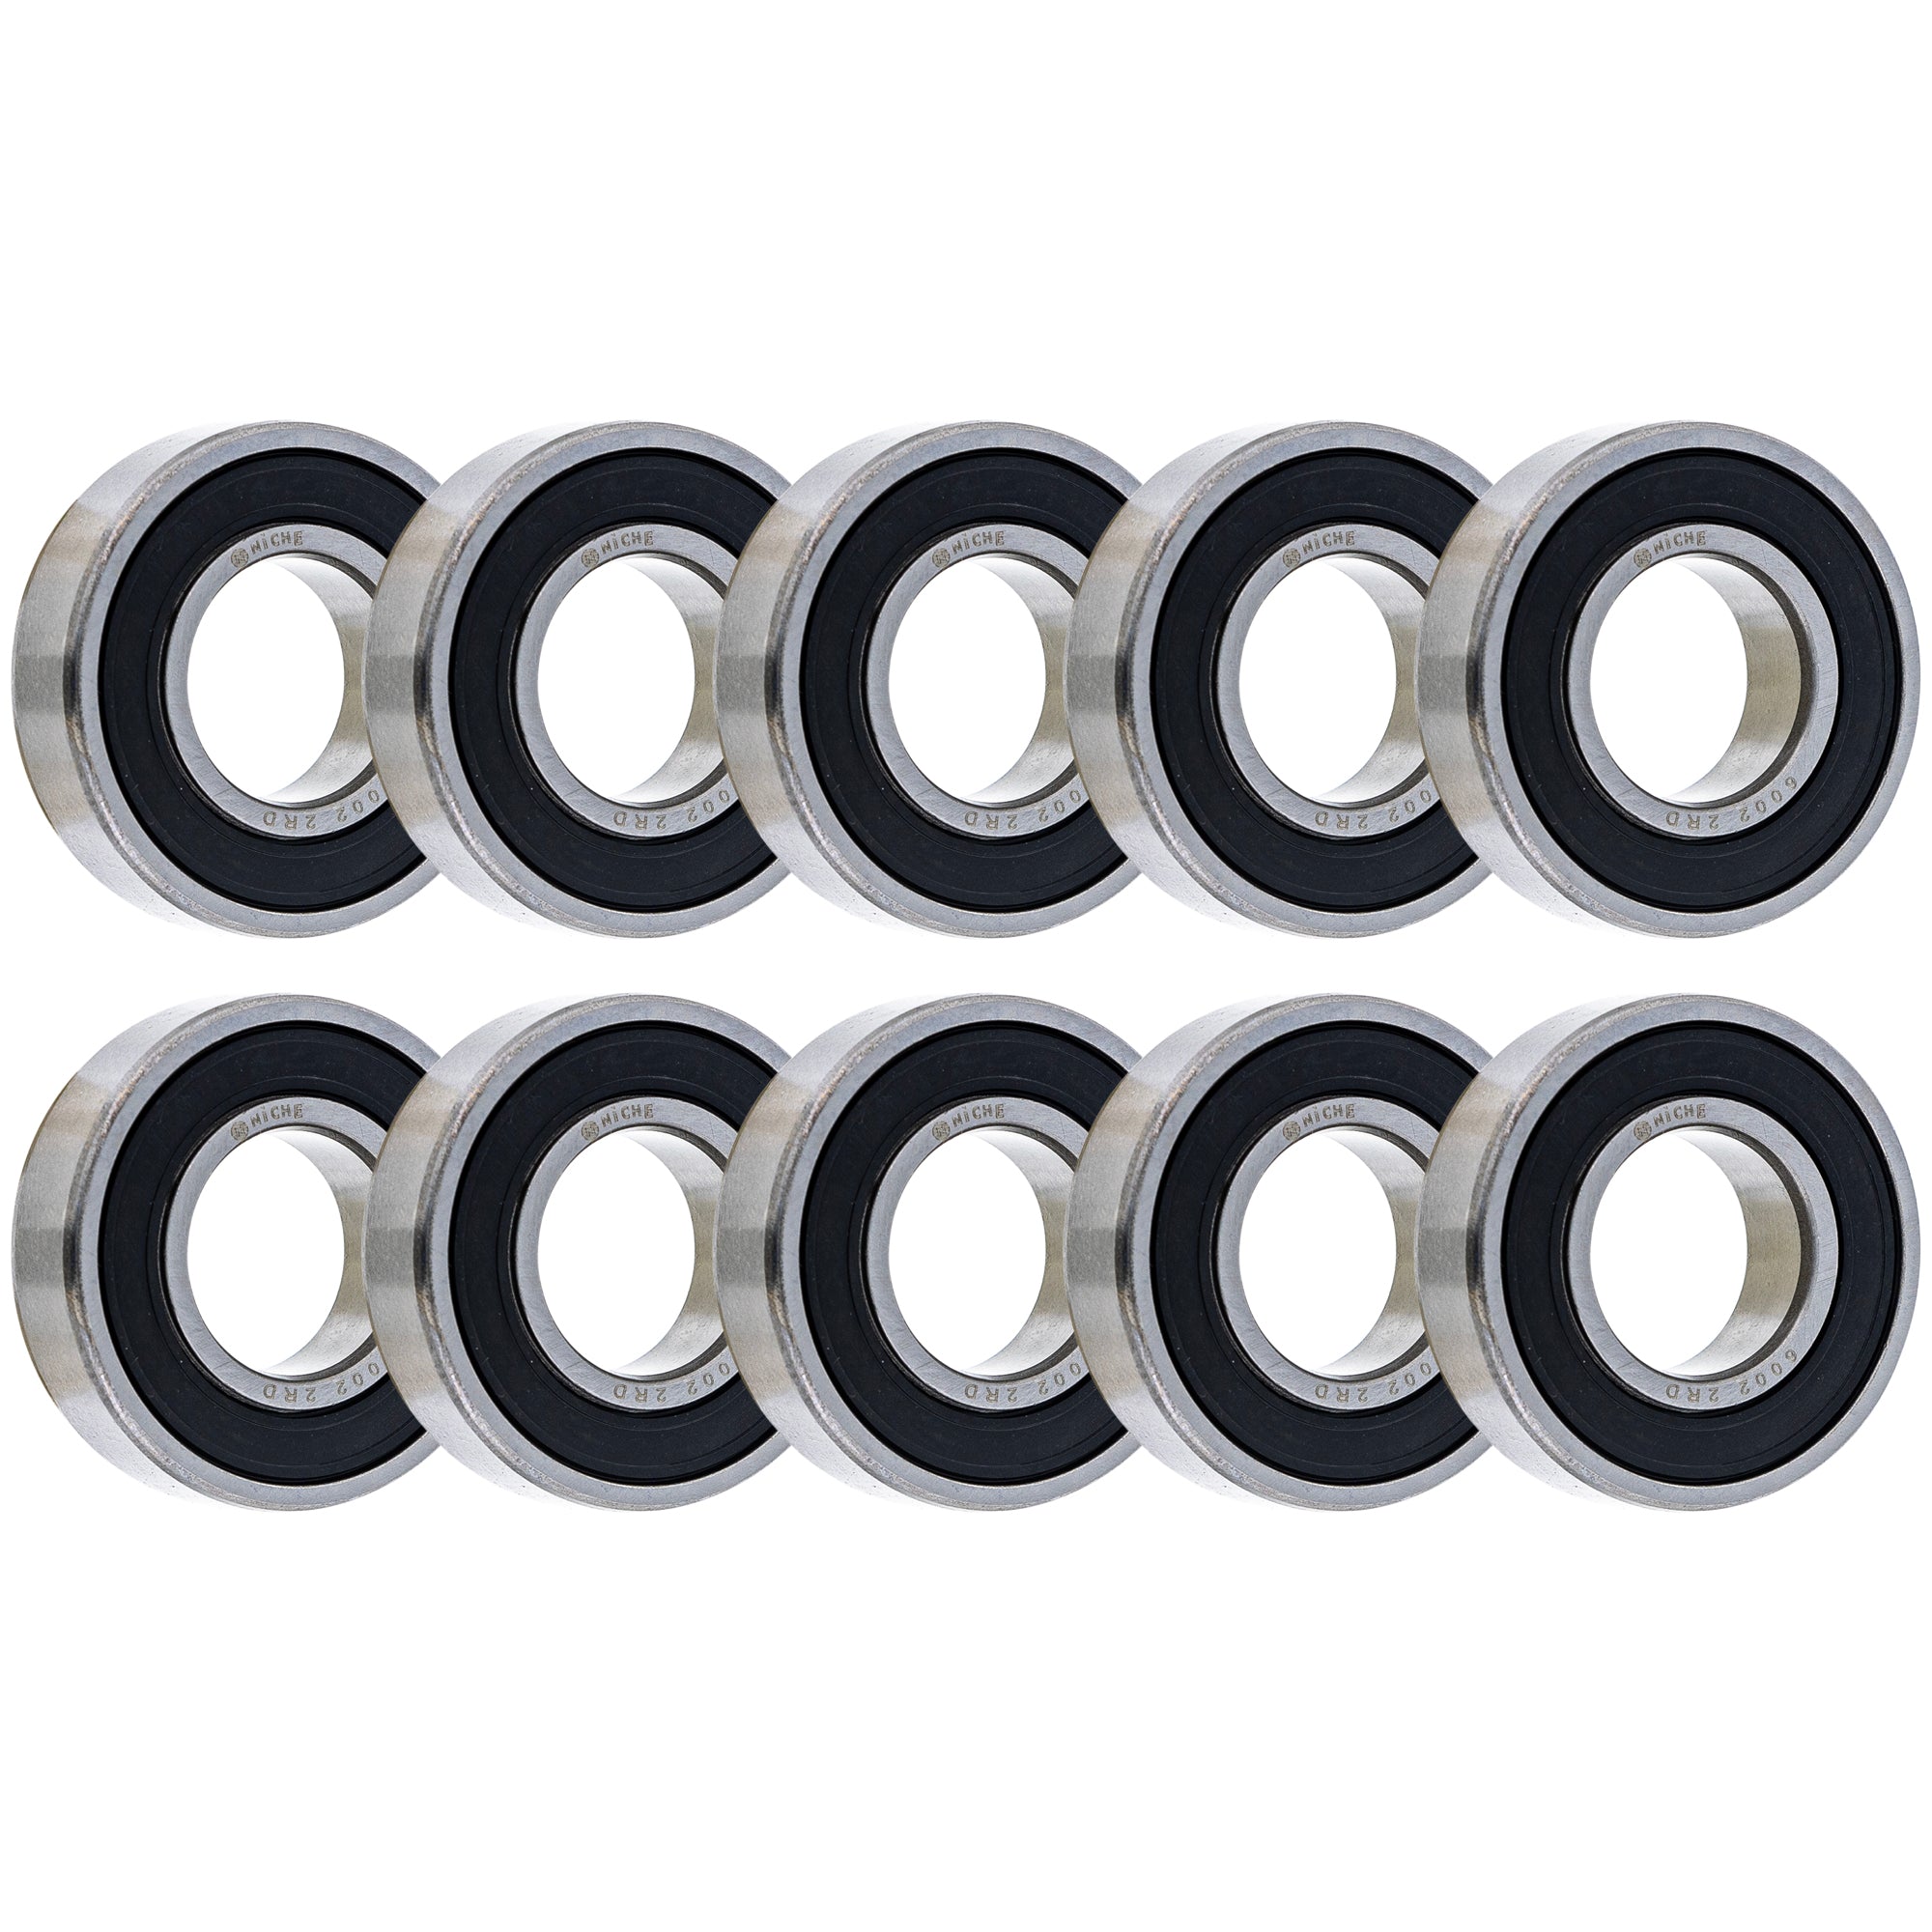 Electric Grade, Single Row, Deep Groove, Ball Bearing Pack of 10 10-Pack for zOTHER HONDA NICHE 519-CBB2334R